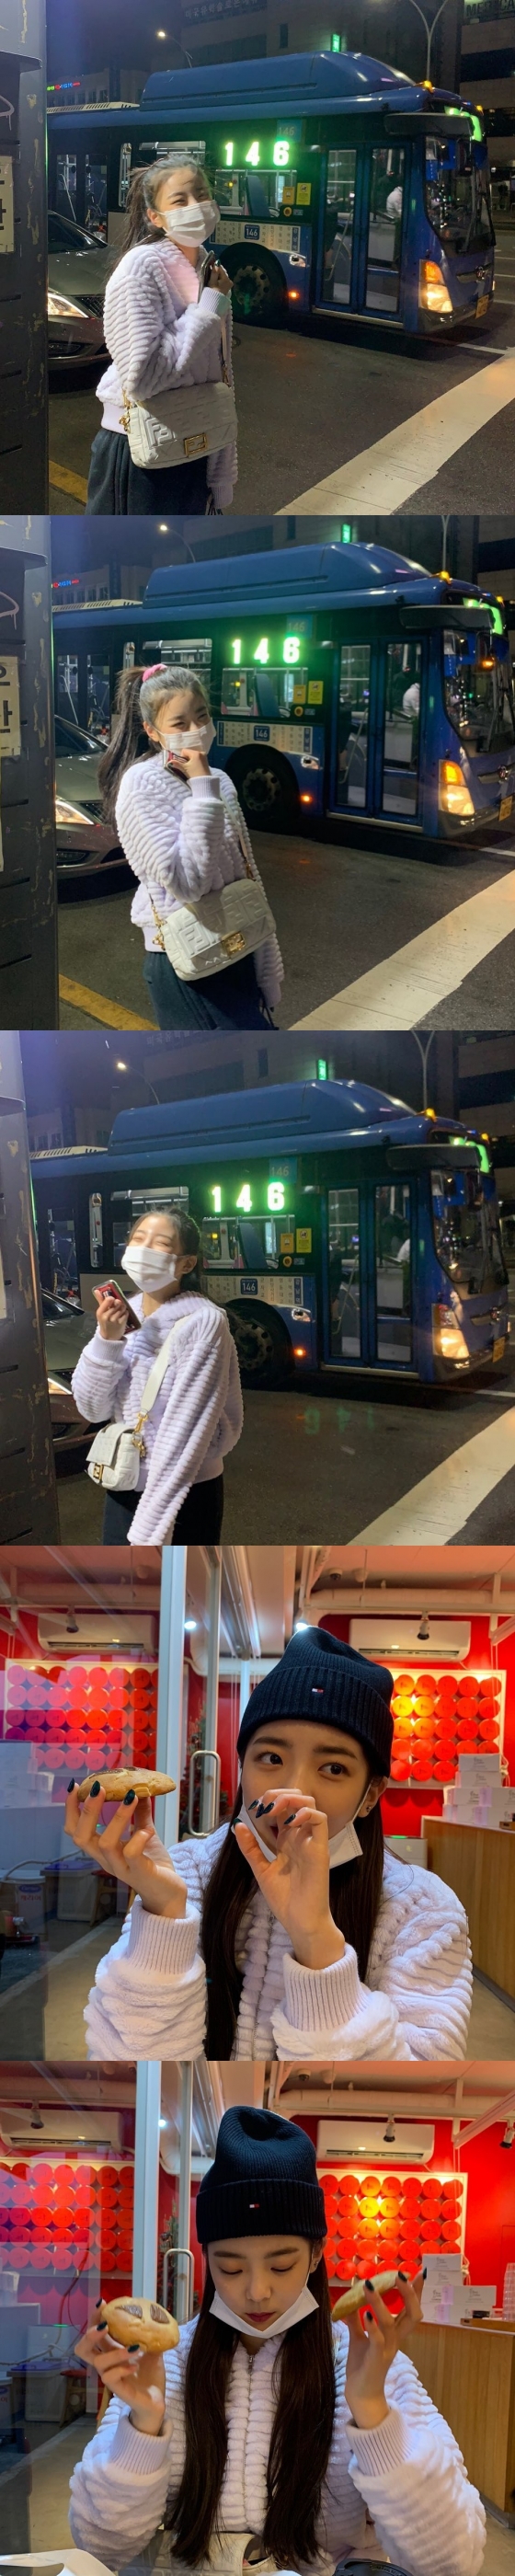 Lia said on the ITZY official Instagram on the 21st, # Believe it!! Did you see the Love at first sight a few days ago?!It was a little bit but it was the first time Snow & Cookies = perfect winter day and posted several photos.In the photo, Lia is walking on the street with a Mask on, and in one store she showed cuteness by wearing a beanie hat and a Mask and holding cookies in both hands.The fans commented, I did not see it, I really came a little bit, I love you, I go to your body and warm this season (Love you honey... take care and warm yourself in this season).Meanwhile, Lias group ITZY was nominated for a new female award at the 2019 Mnet Asian Music Awards (2019 MAMA).